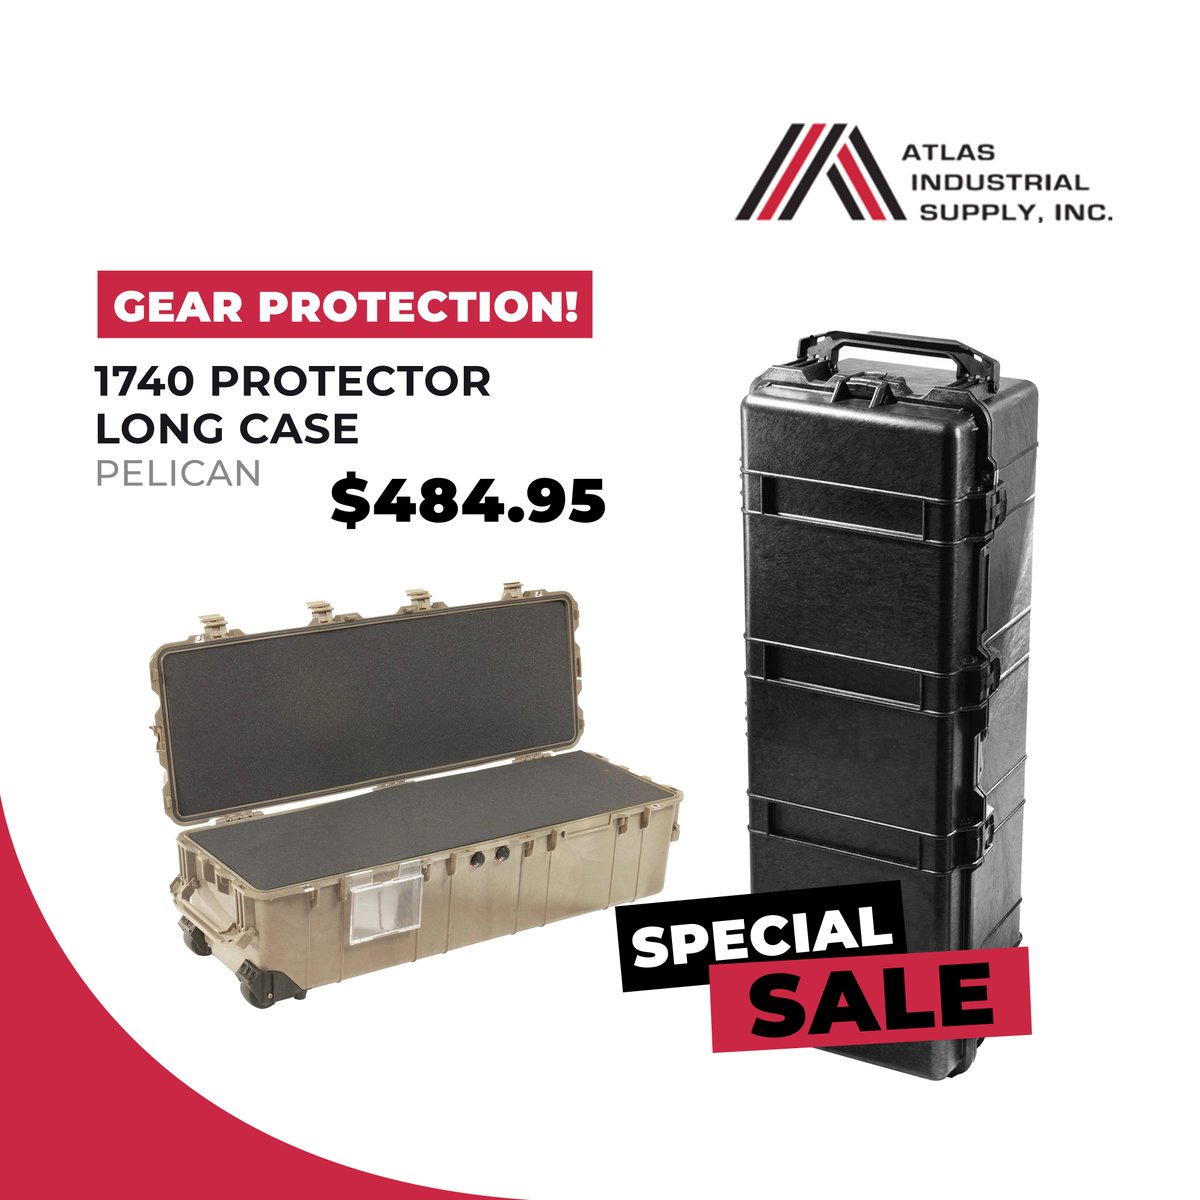 Defend your valuables with the Pelican 1740 Protector Long Case - the ultimate solution for safe transport.

📞 +1 281-591-2211
🌐 lar.one/Peli_6

#Pelican #ProtectorCase #LongCase #GearProtection #TravelEssentials #PelicanCases #Pelican1740